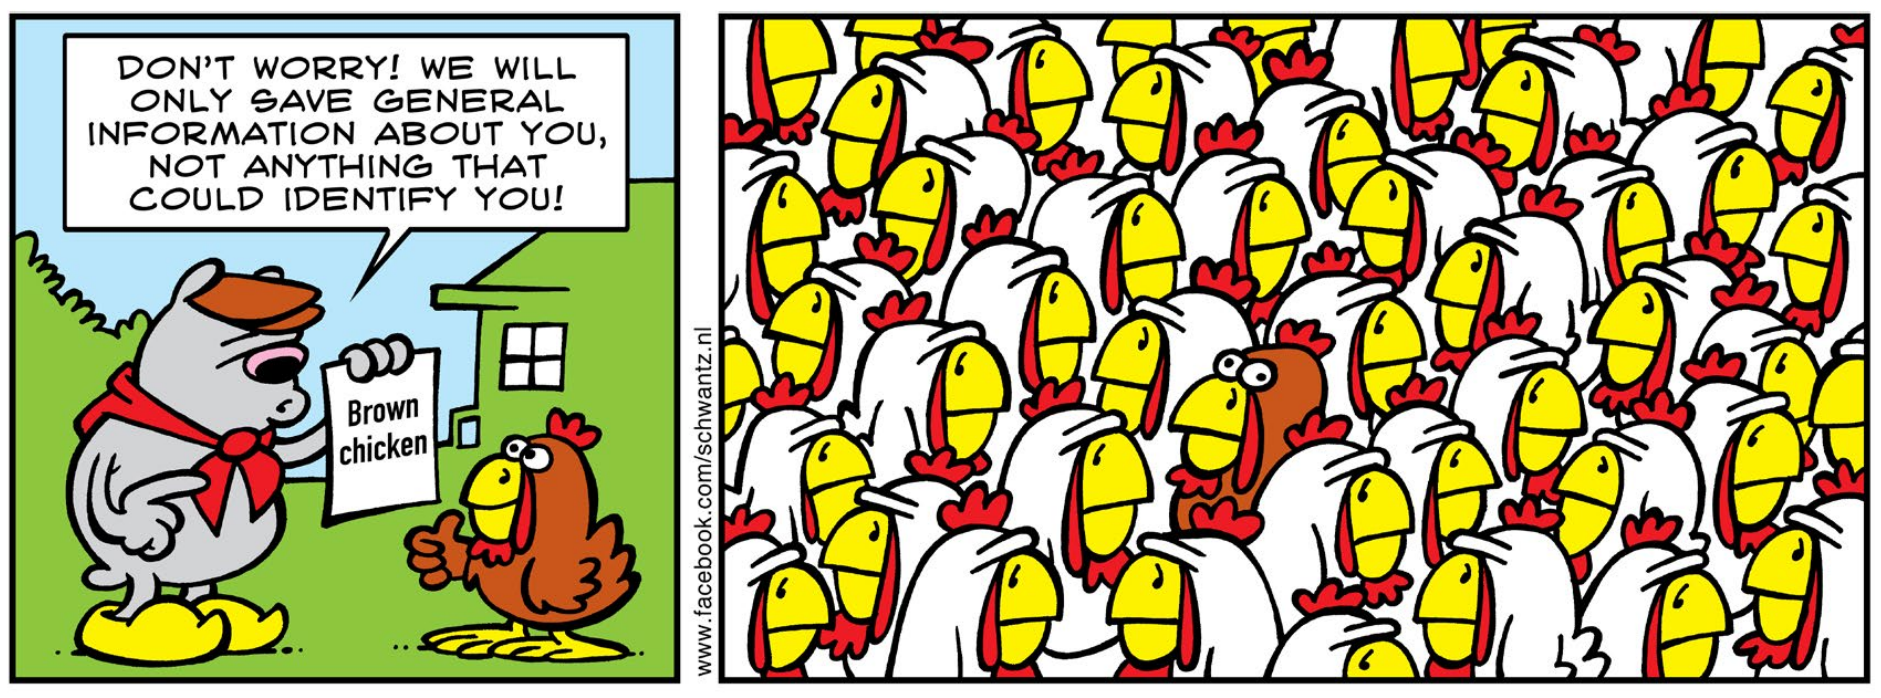 Comic about anonymous data. The left pane shows an animal that says ‘Don’t worry! We will only save general information about you, not anything that could identify you!’, while holding a paper that says ‘Brown chicken’. Next to the animal is a brown chicken giving a ‘thumbs up’. The right pane shows that one brown chicken in a crowd of white chickens.